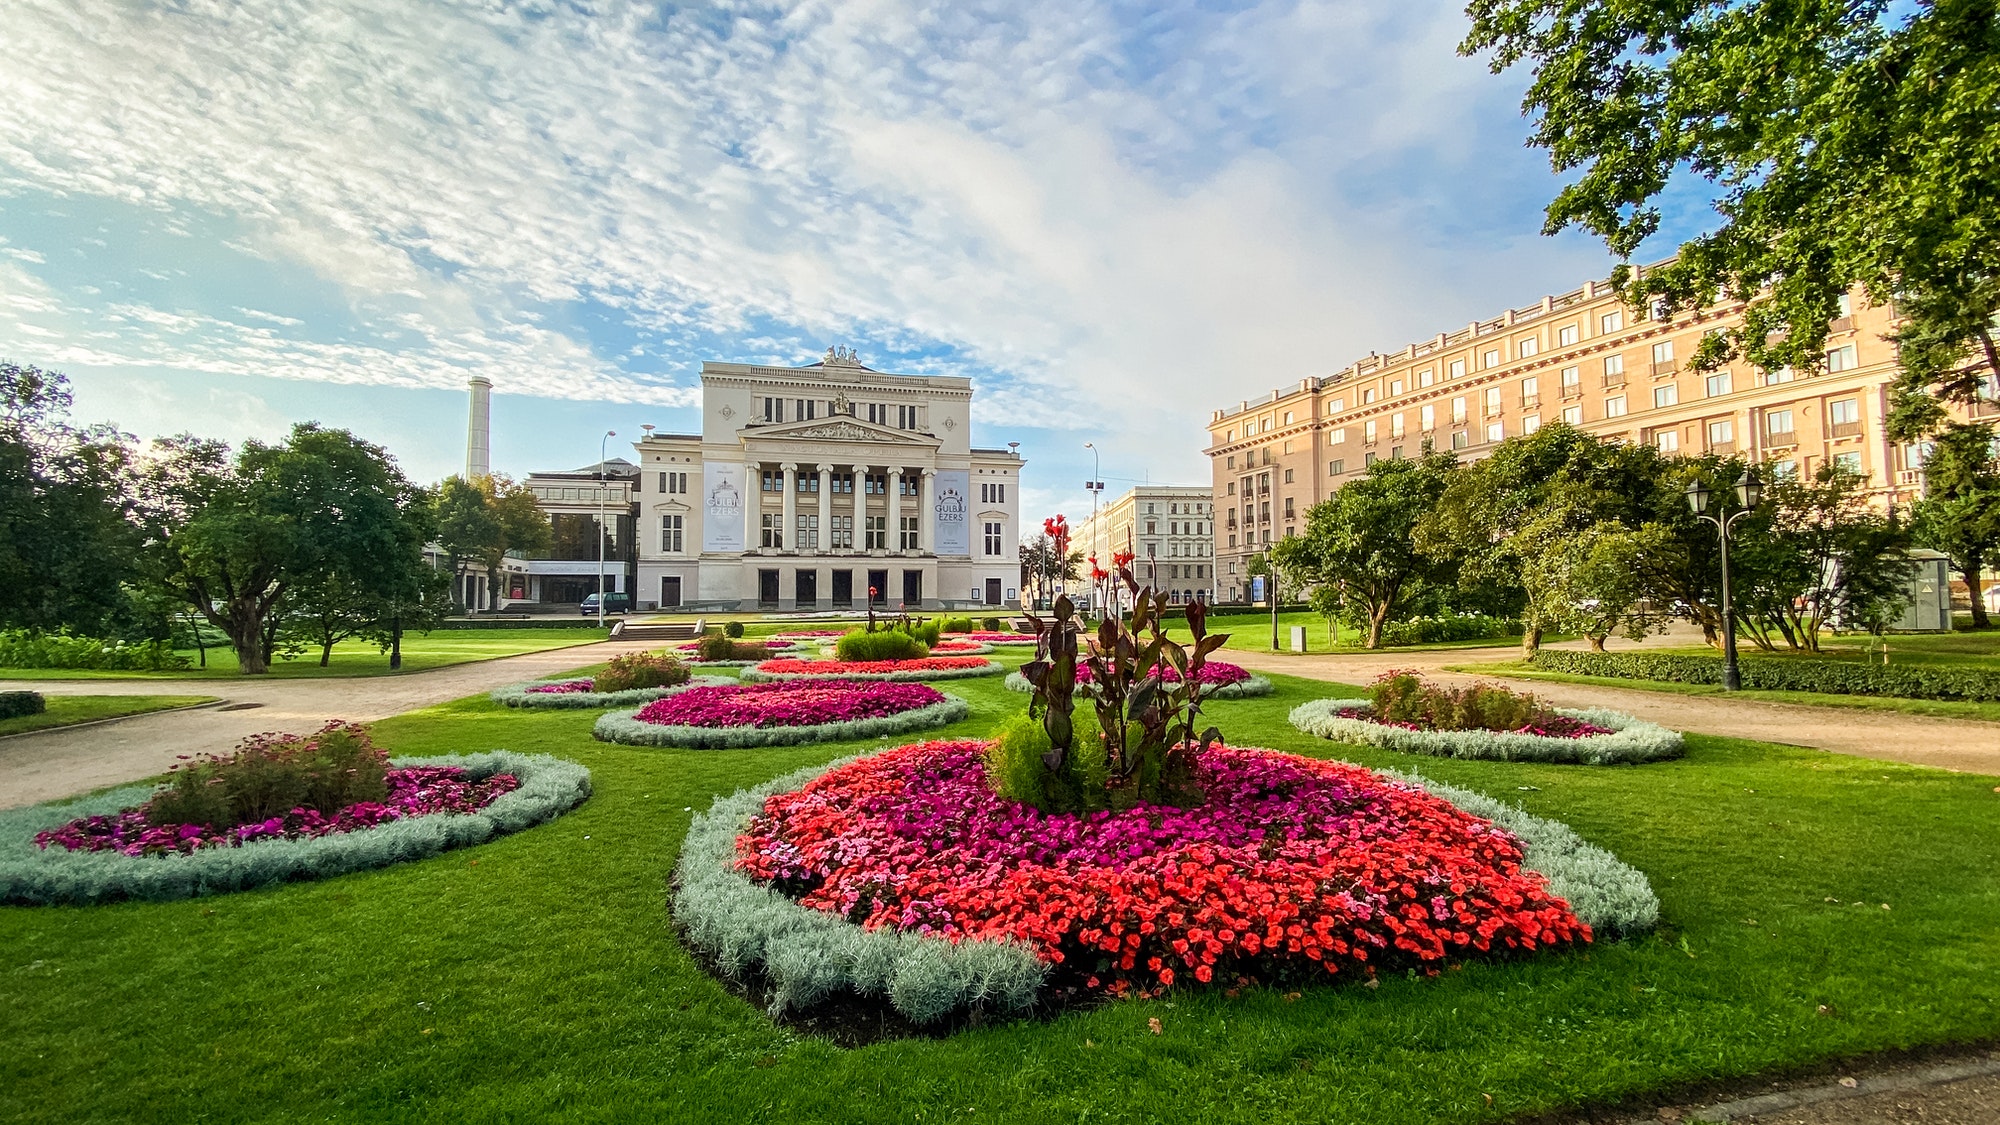 Consider getting your MBBS in Latvia if you want to study in Europe and English!